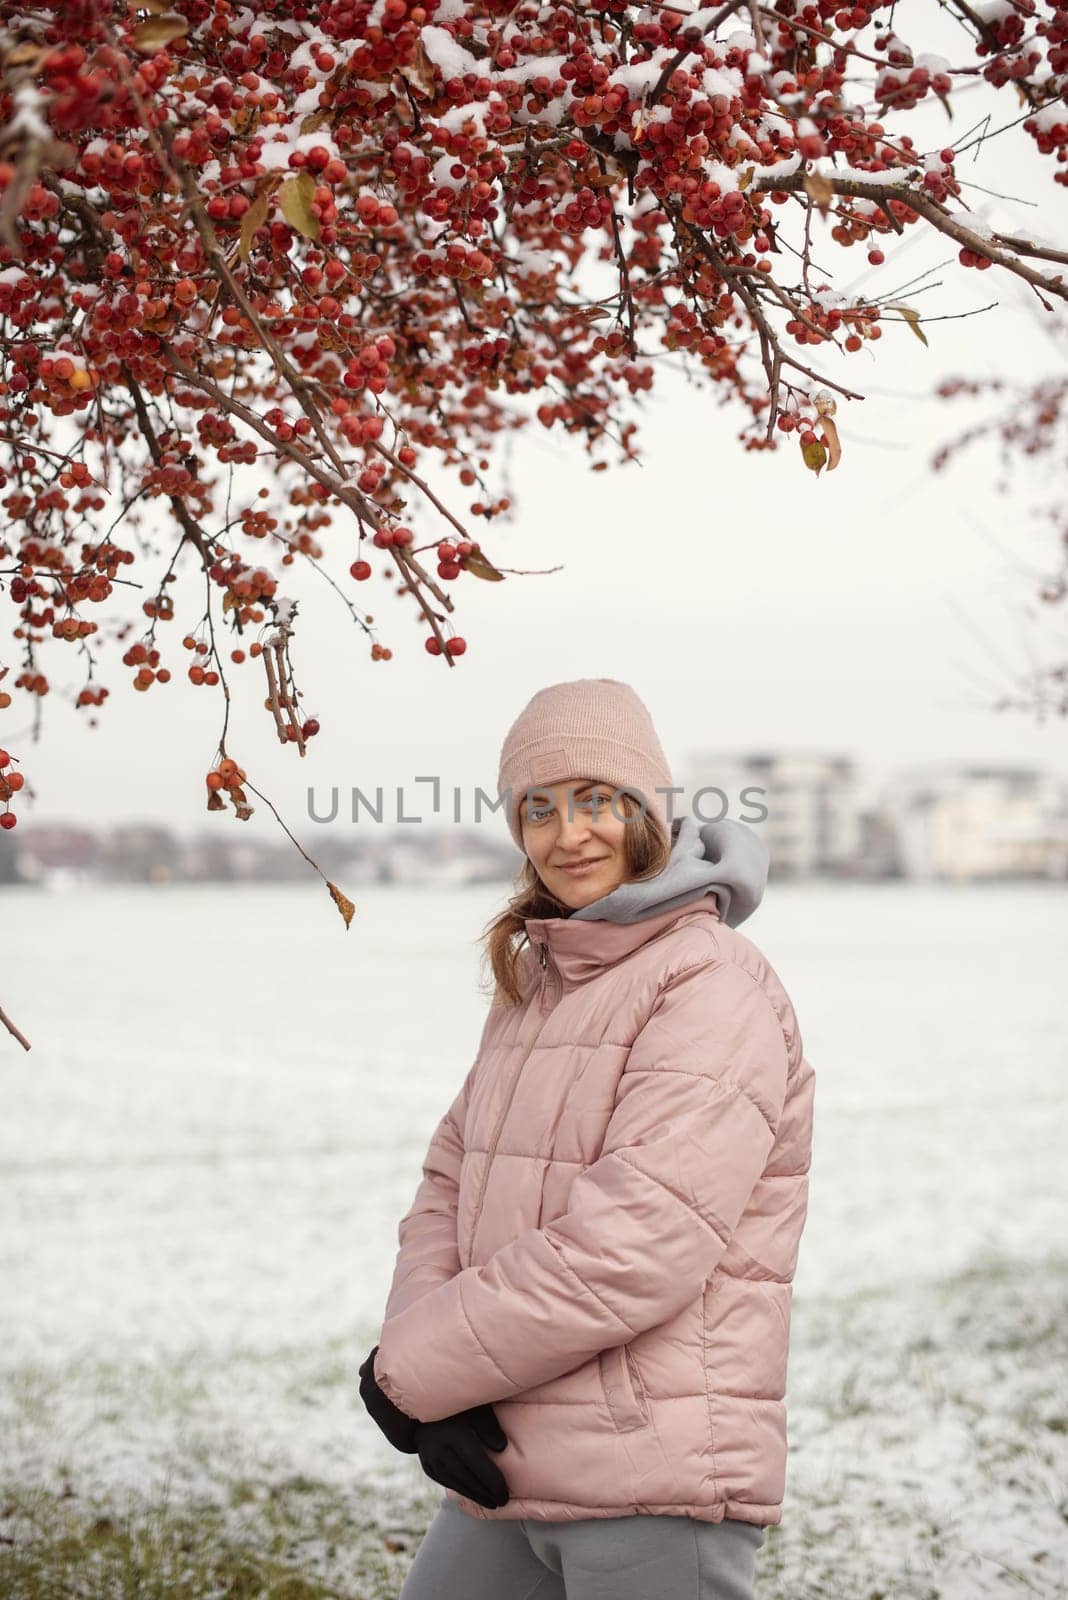 Winter Elegance: Portrait of a Beautiful Girl in a Snowy European Village. Winter lifestyle portrait of cheerful pretty girl. Smiling and having fun in the snow park. Snowflakes falling down. Christmas Radiance: Capturing Winter Elegance in the Snowy Ambiance of a European Village by Andrii_Ko